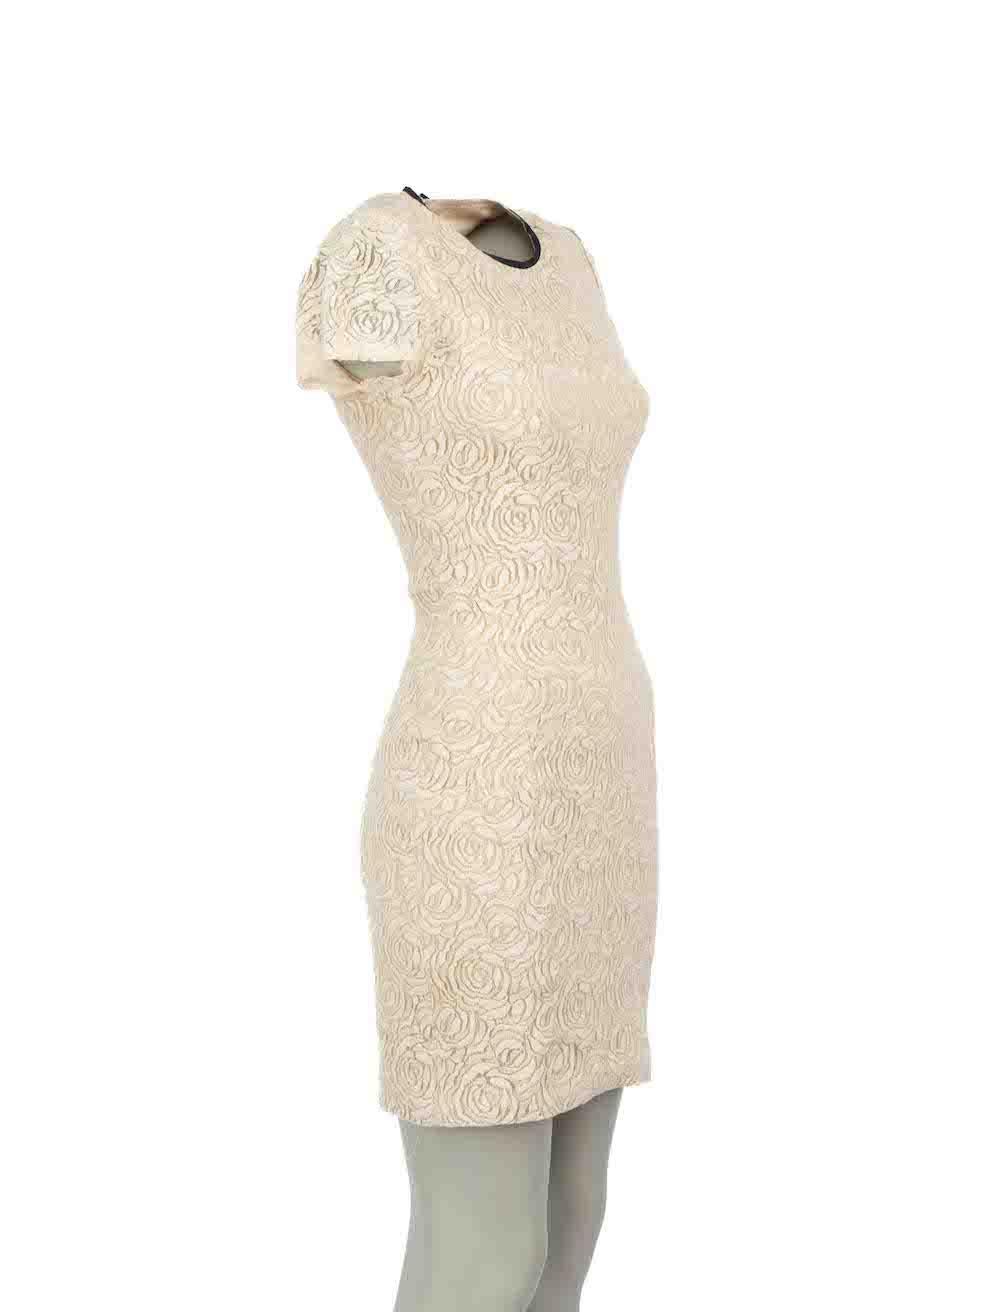 CONDITION is Very good. Minimal wear to dress is evident. Minimal wear to lace exterior with handful of stray thread ends found throughout on this used L'Agence designer resale item.
 
Details
Ecru
Cotton
Bodycon dress
Floral lace pattern
Mini
Short